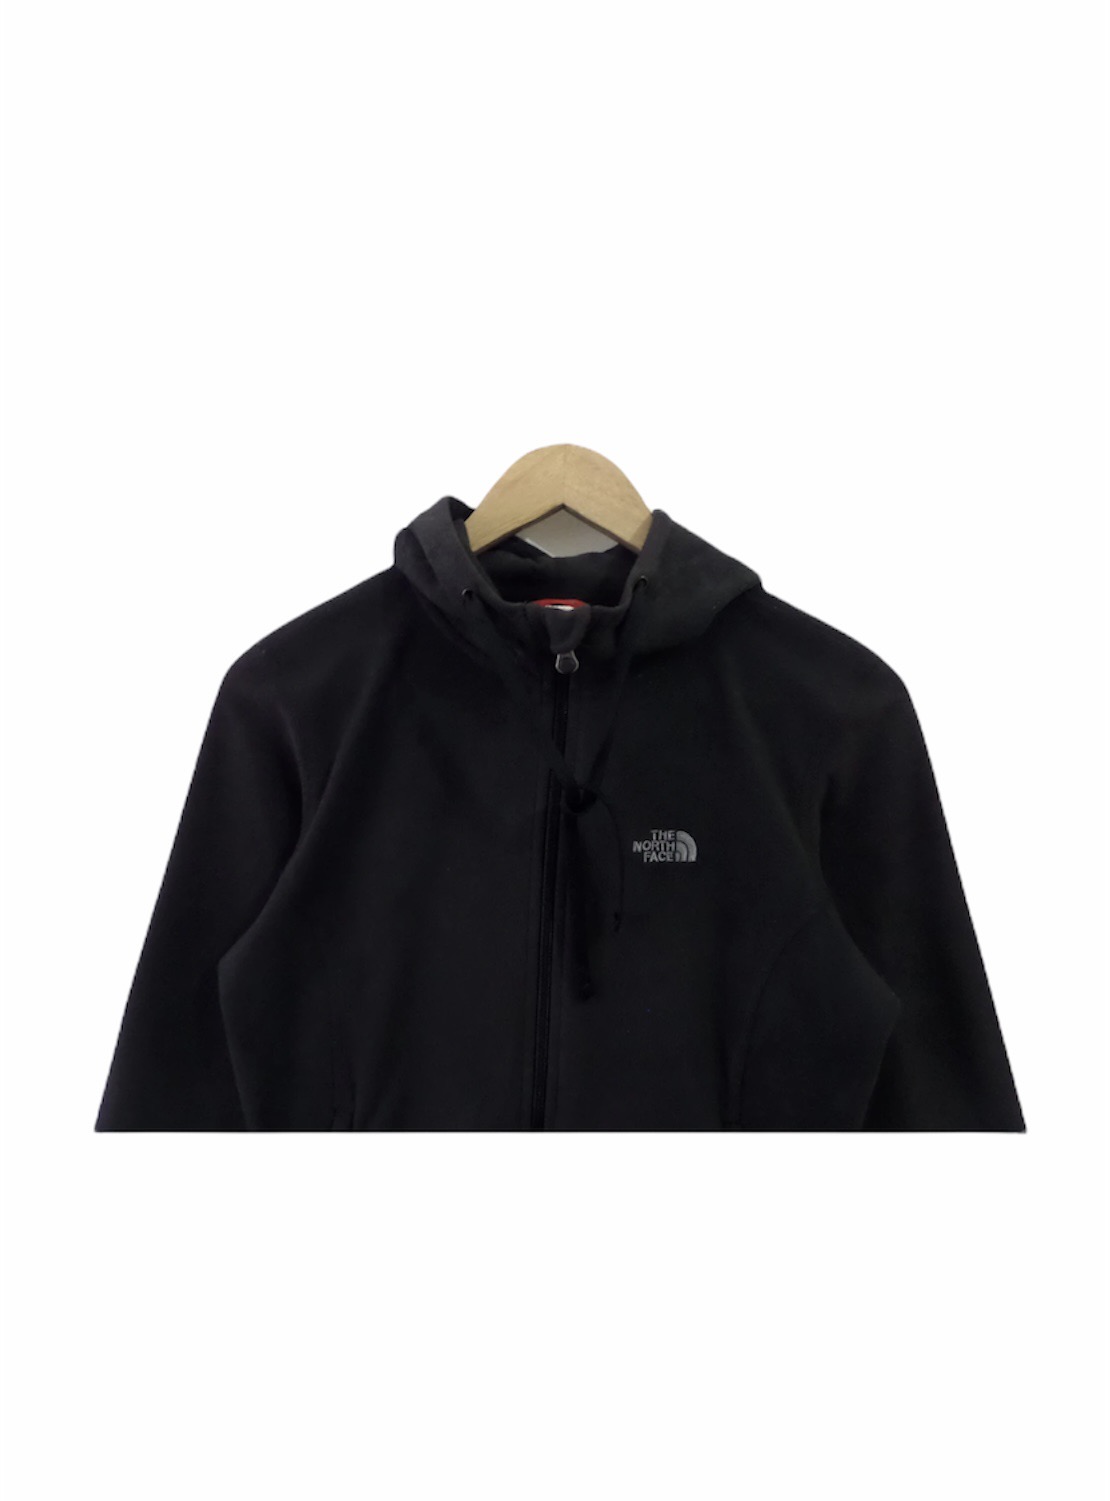 The North Face Fleece Sweater Hoodie Jacket - 4